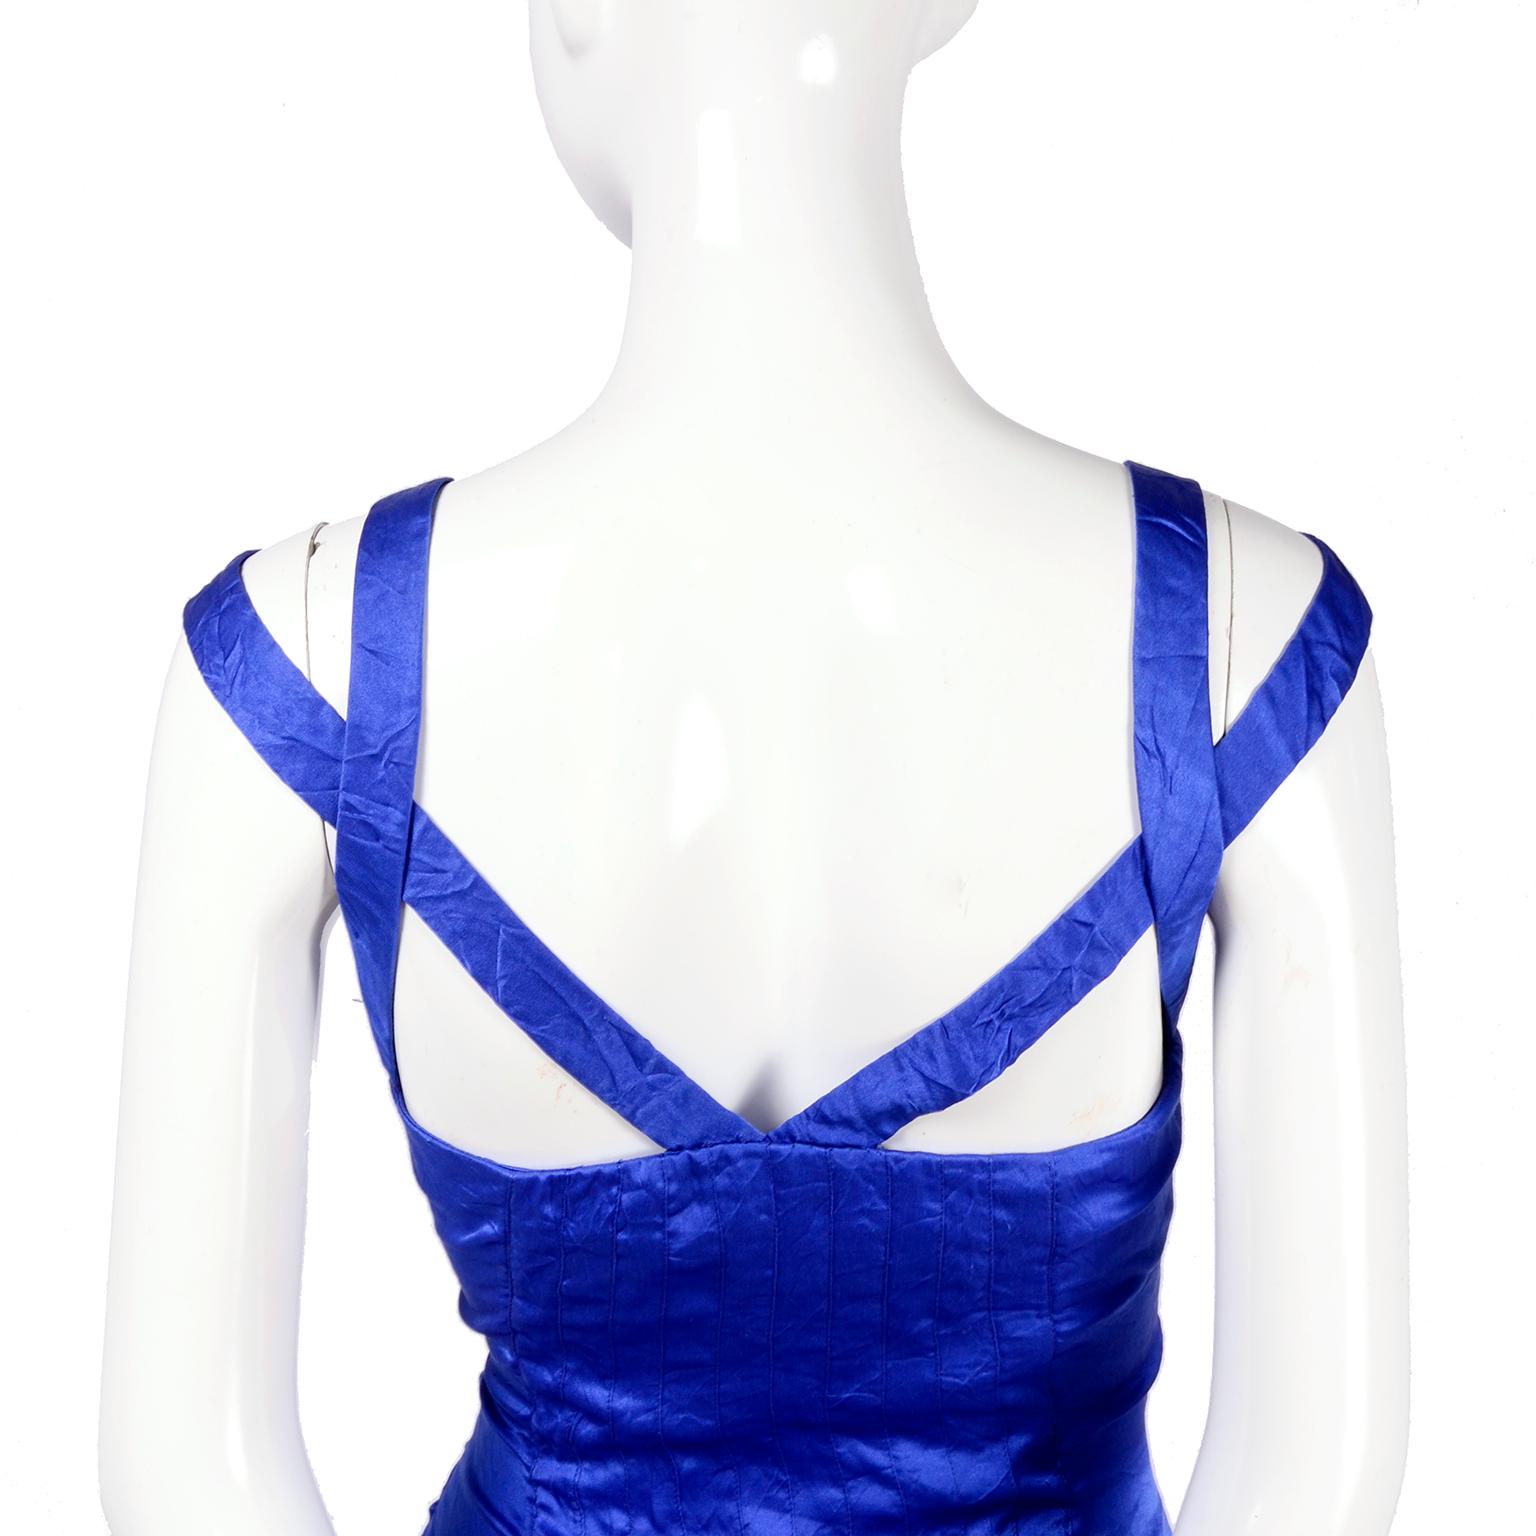 Gianni Versace Couture Blue Silk Documented Runway Dress, 1994 For Sale ...